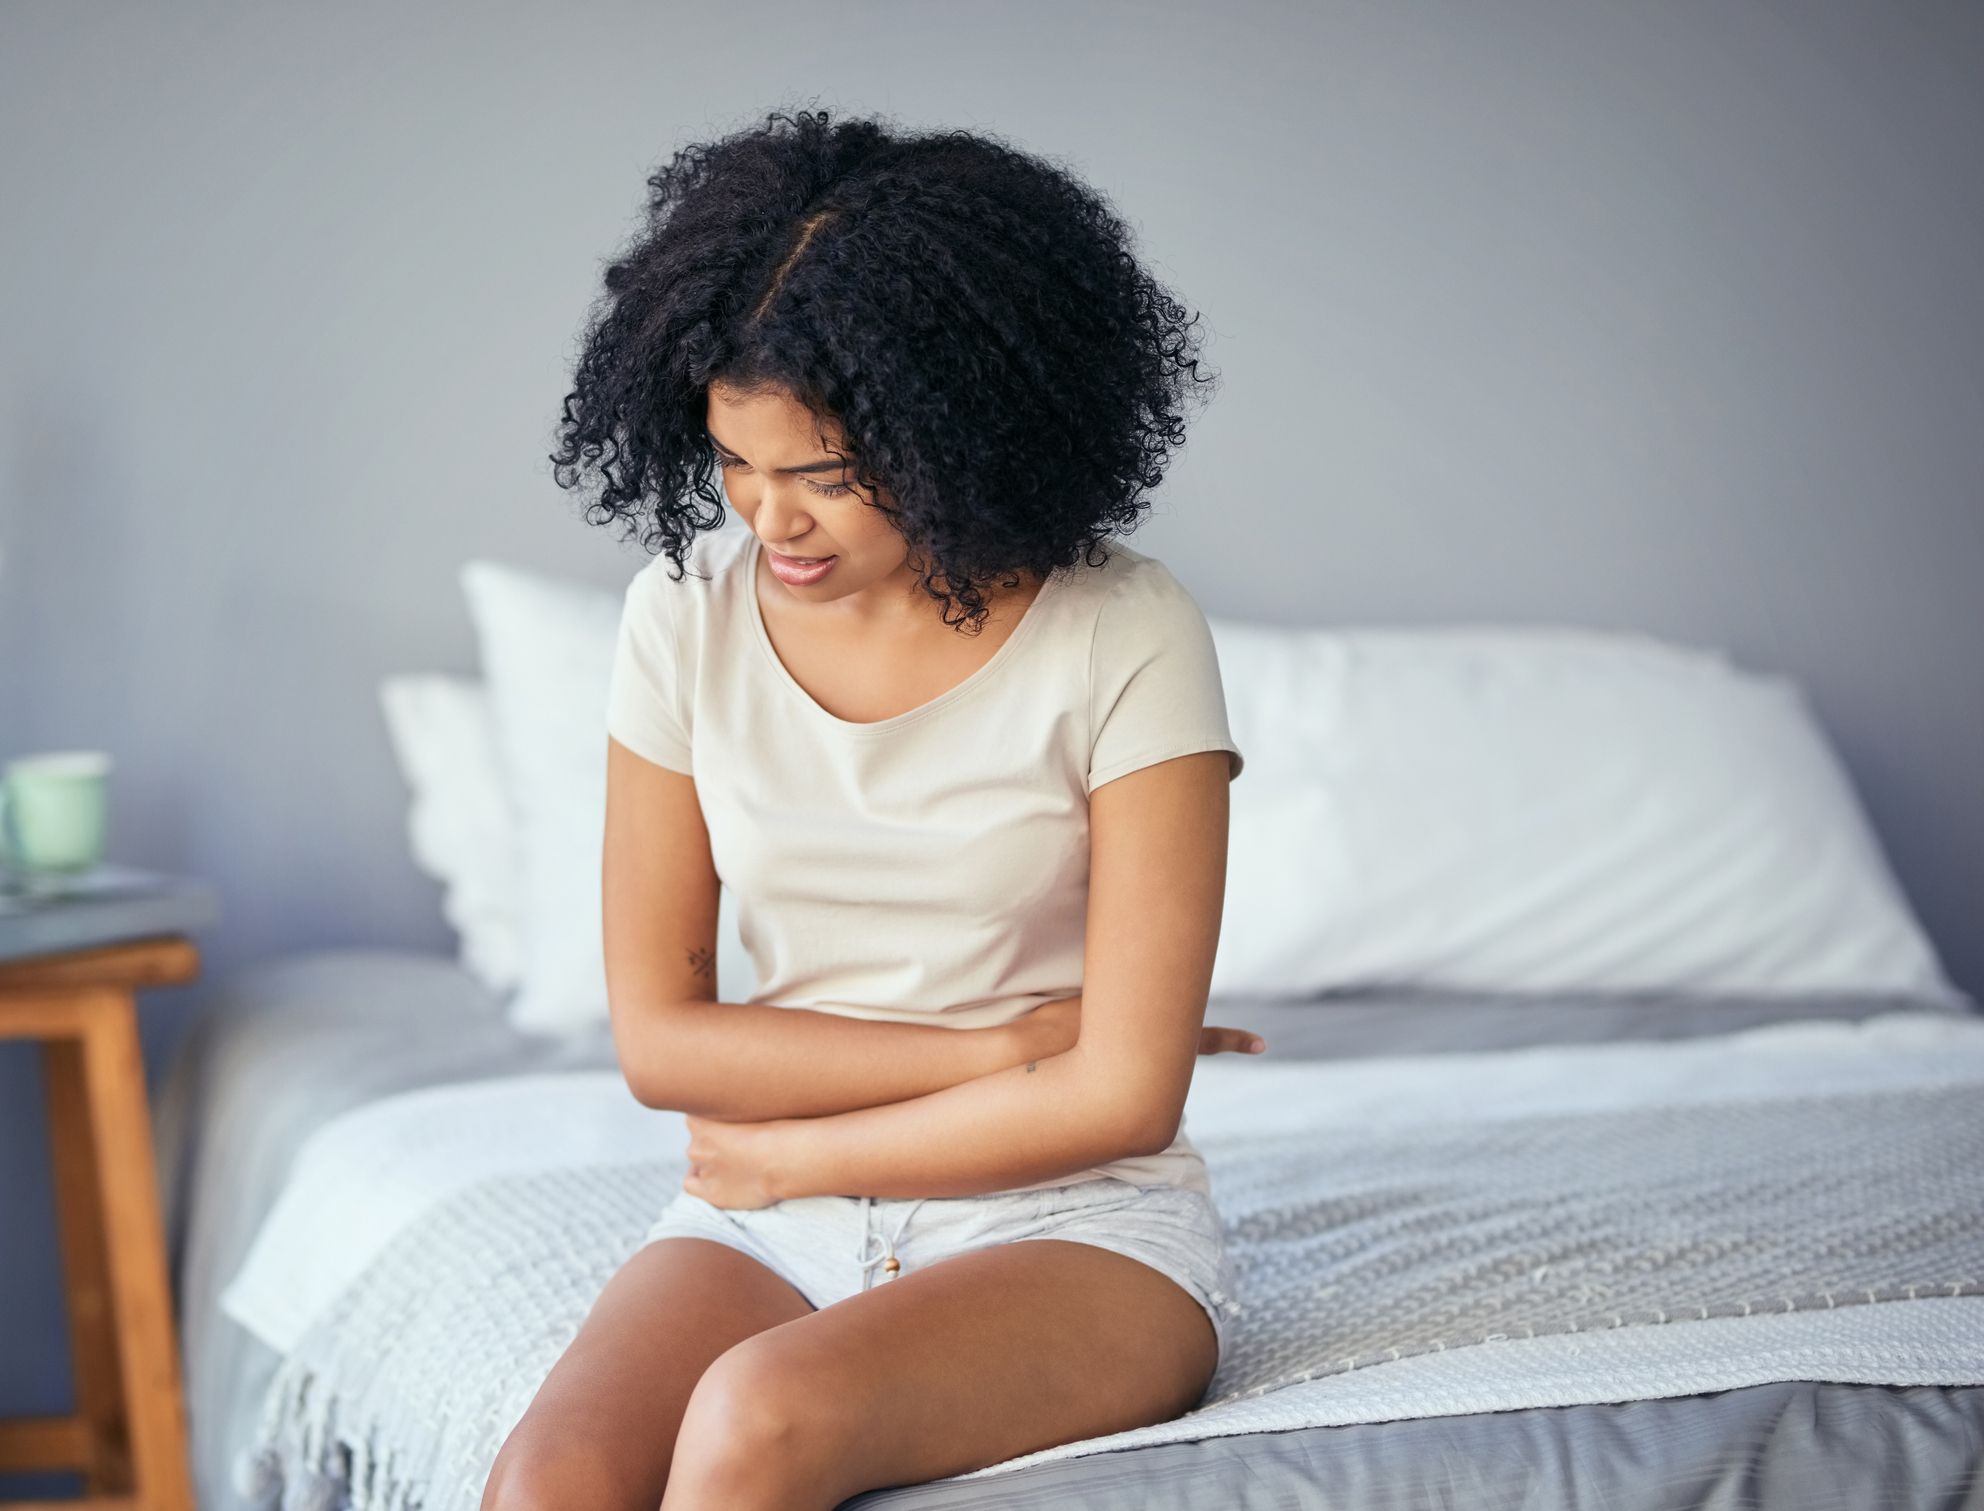 can pcos cause period pains a shot of a young woman suffering from stomach cramps in her bedroom